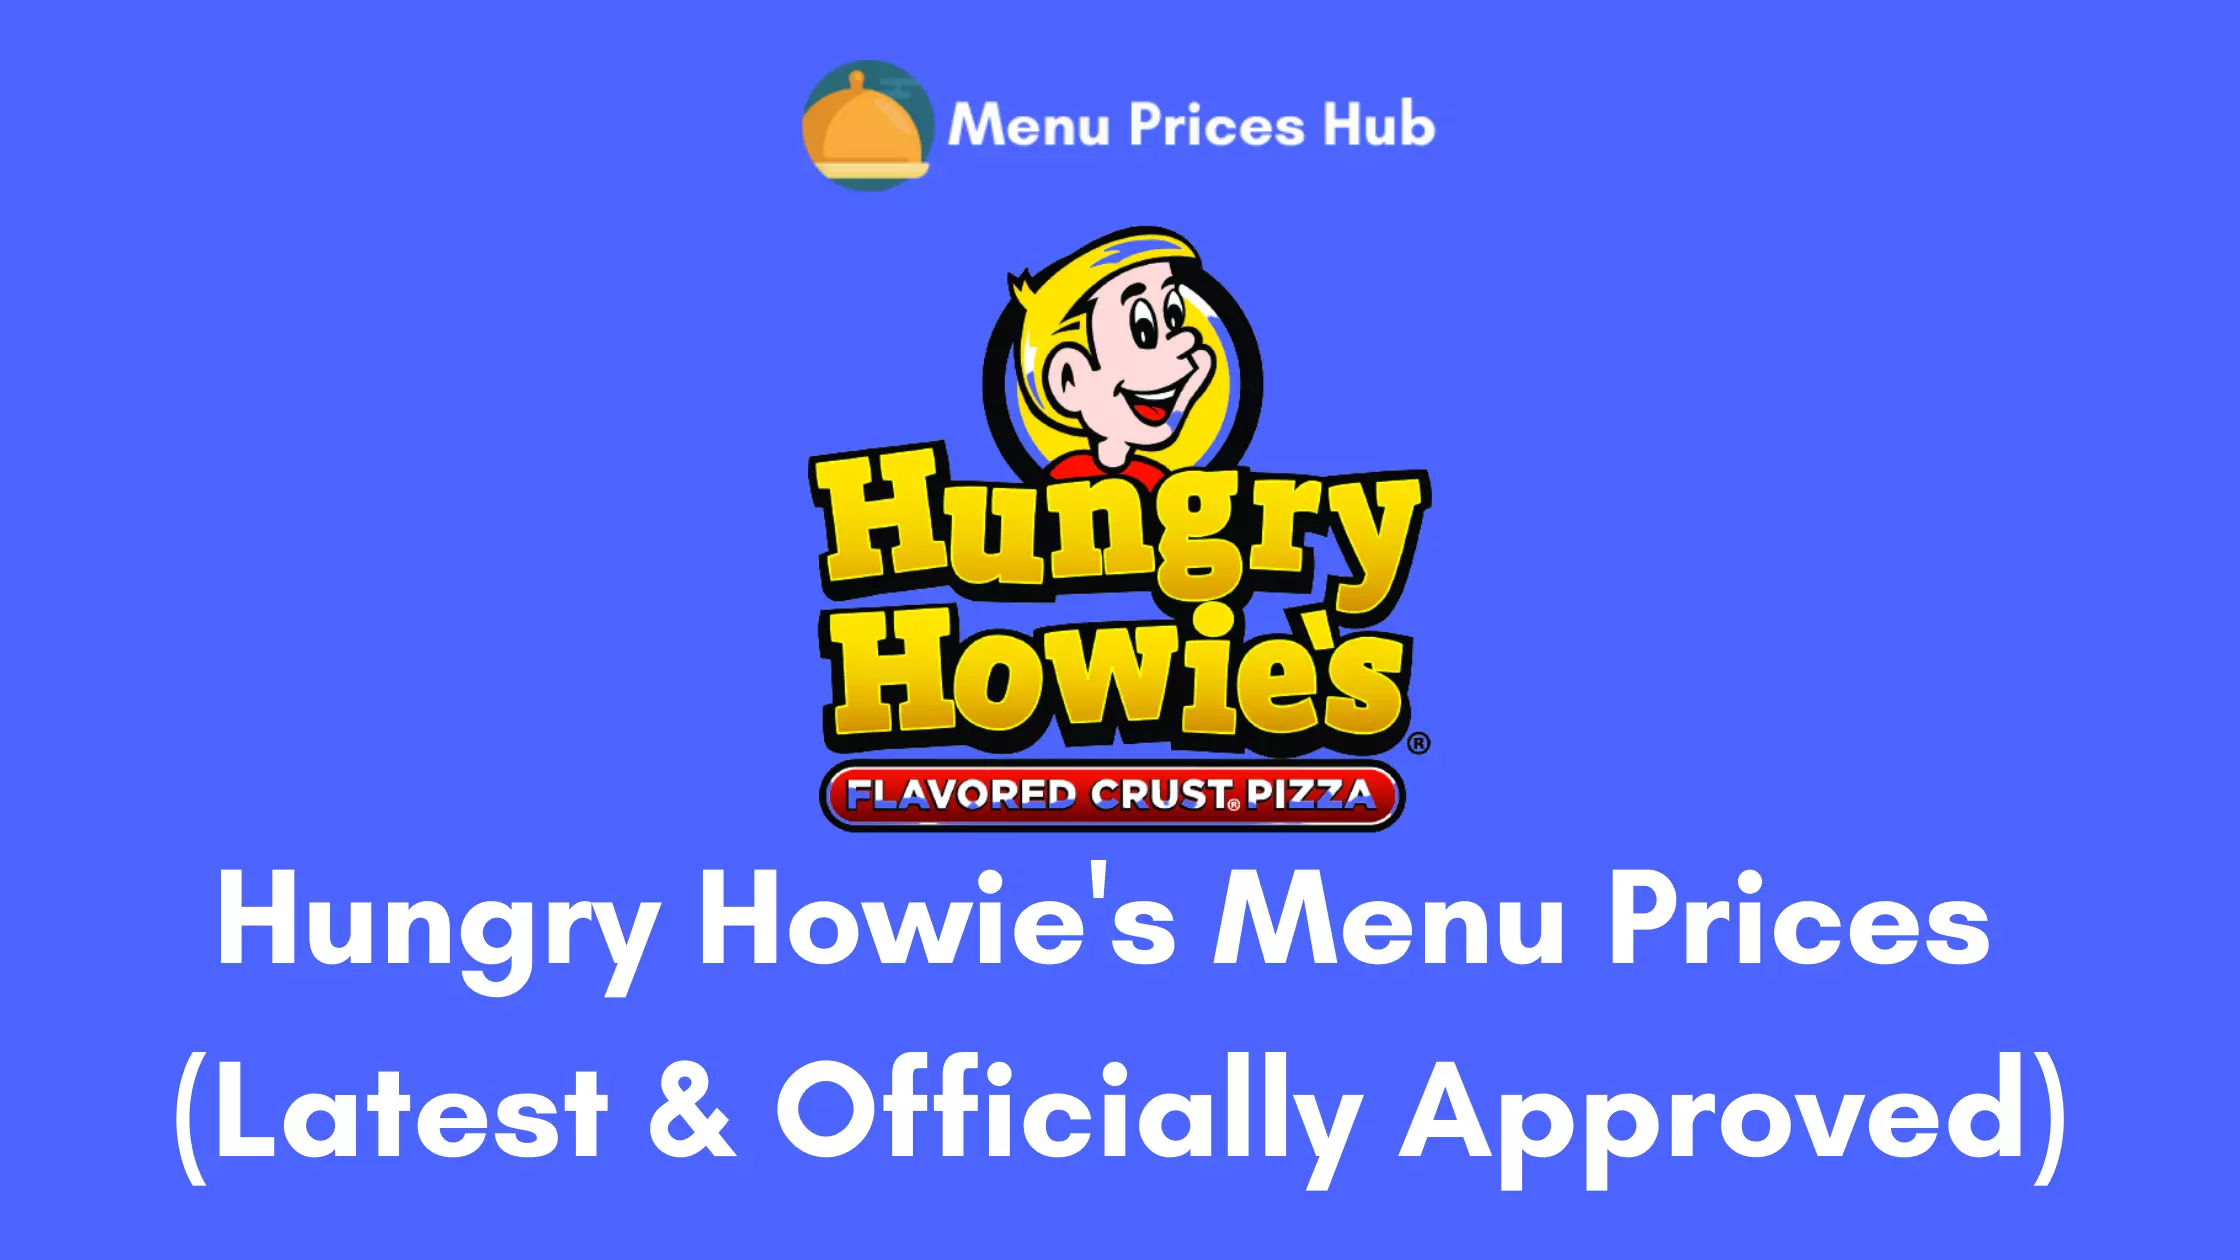 Hungry Howie’s Menu Prices